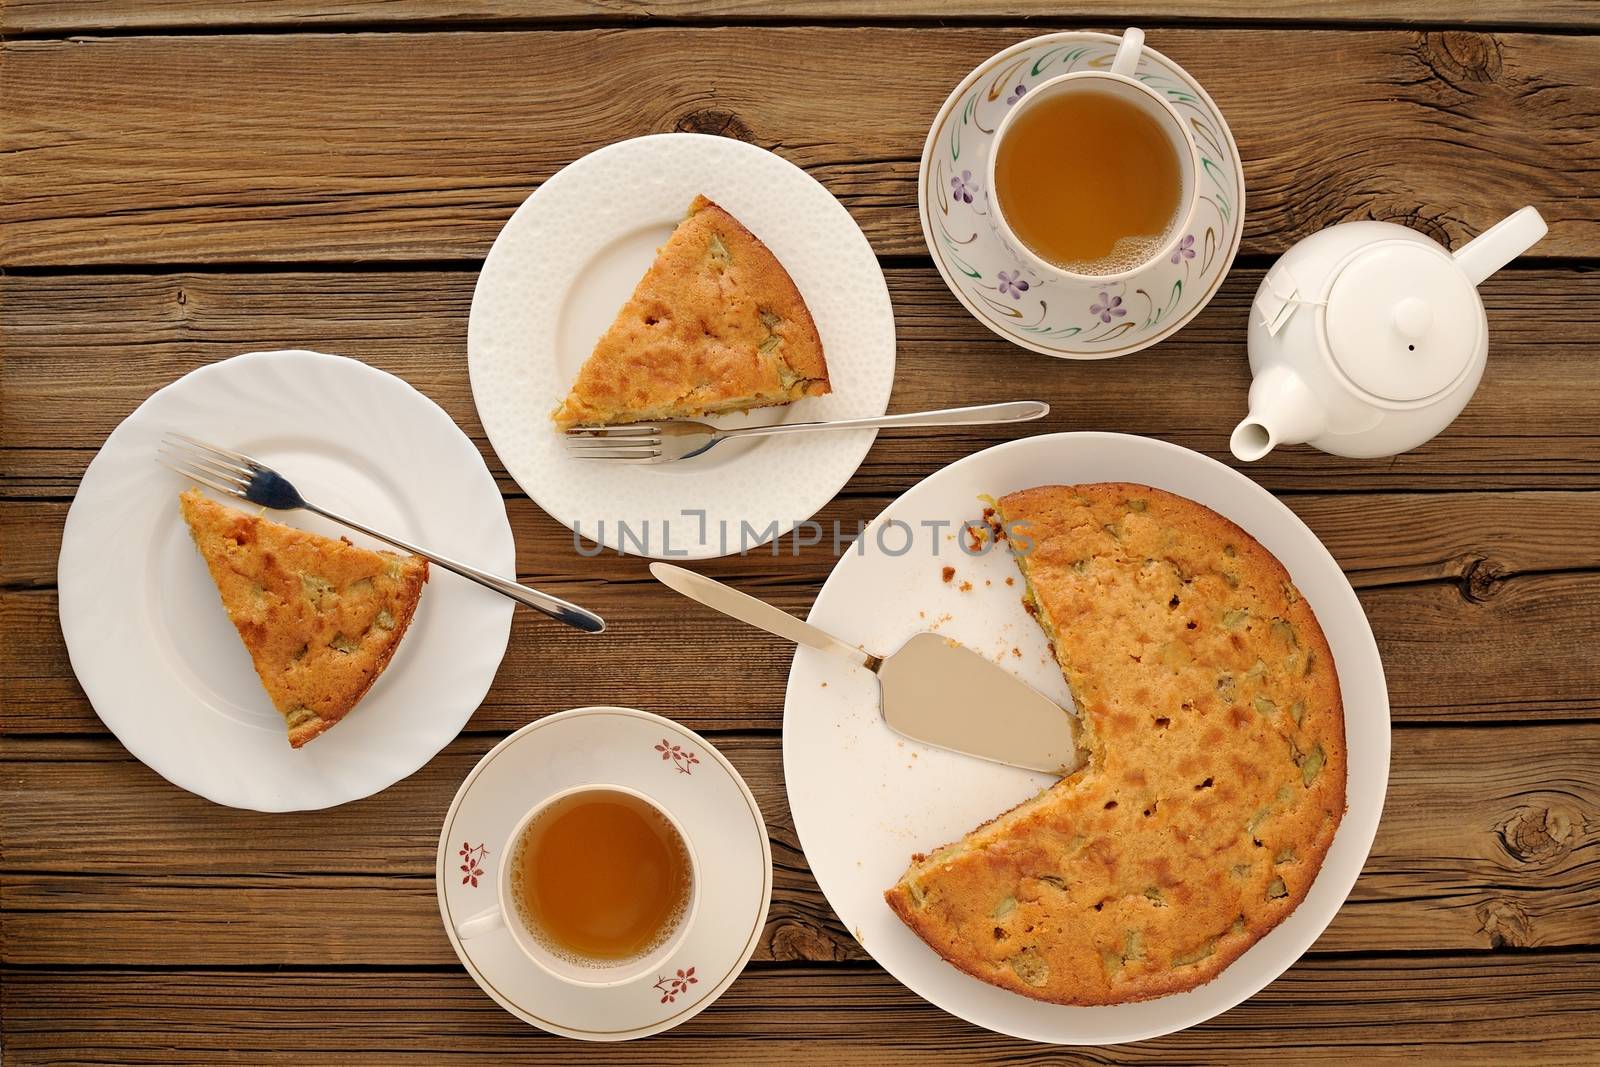 Old fashioned apple pie with black tea on wooden background by Borodin